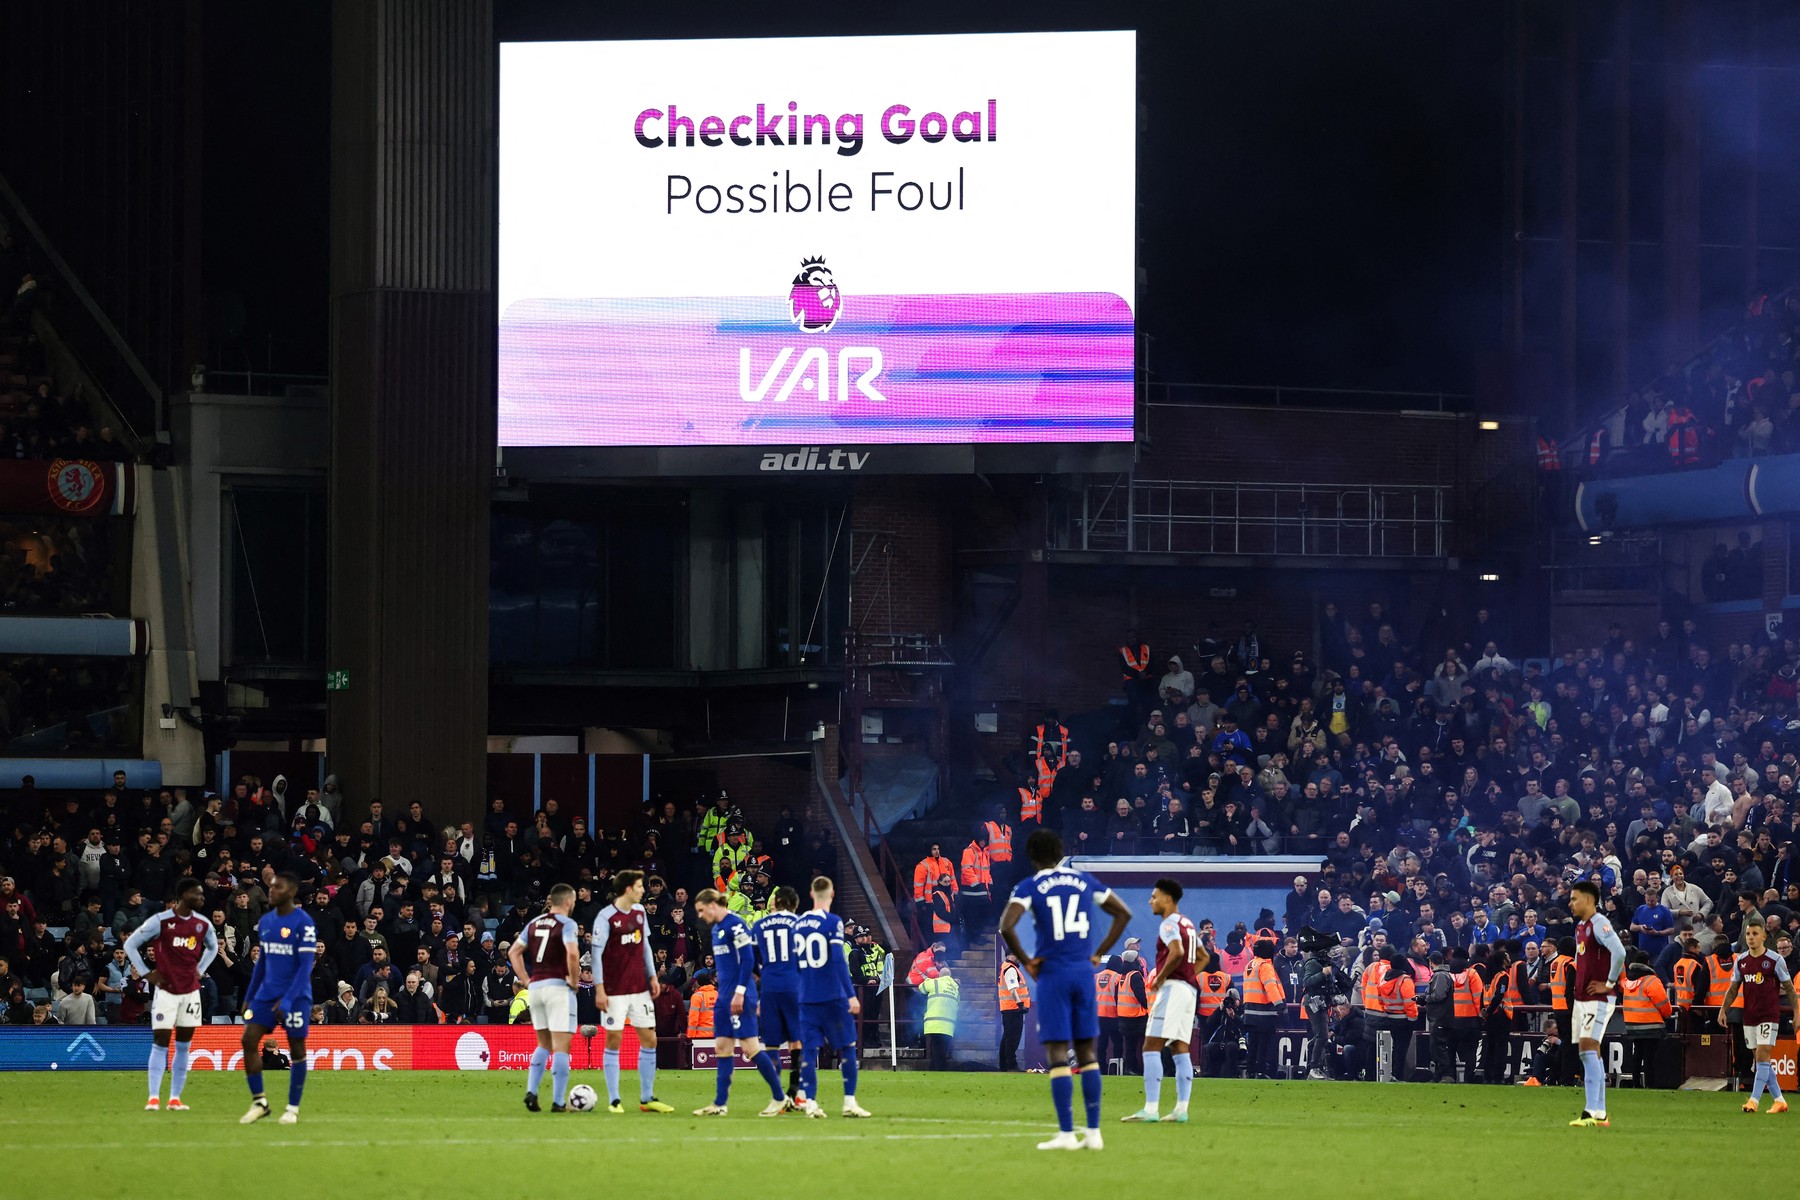 Players wait for referee Craig Pawson to check the VAR before disallowing the goal of Chelsea's French defender #02 Axel Disasi due to an offside position during the English Premier League football match between Aston Villa and Chelsea at Villa Park in Birmingham, central England on April 27, 2024.,Image: 868462195, License: Rights-managed, Restrictions: RESTRICTED TO EDITORIAL USE. No use with unauthorized audio, video, data, fixture lists, club/league logos or 'live' services. Online in-match use limited to 120 images. An additional 40 images may be used in extra time. No video emulation. Social media in-match use limited to 120 images. An additional 40 images may be used in extra time. No use in betting publications, games or single club/league/player publications., Model Release: no, Credit line: Darren Staples / AFP / Profimedia